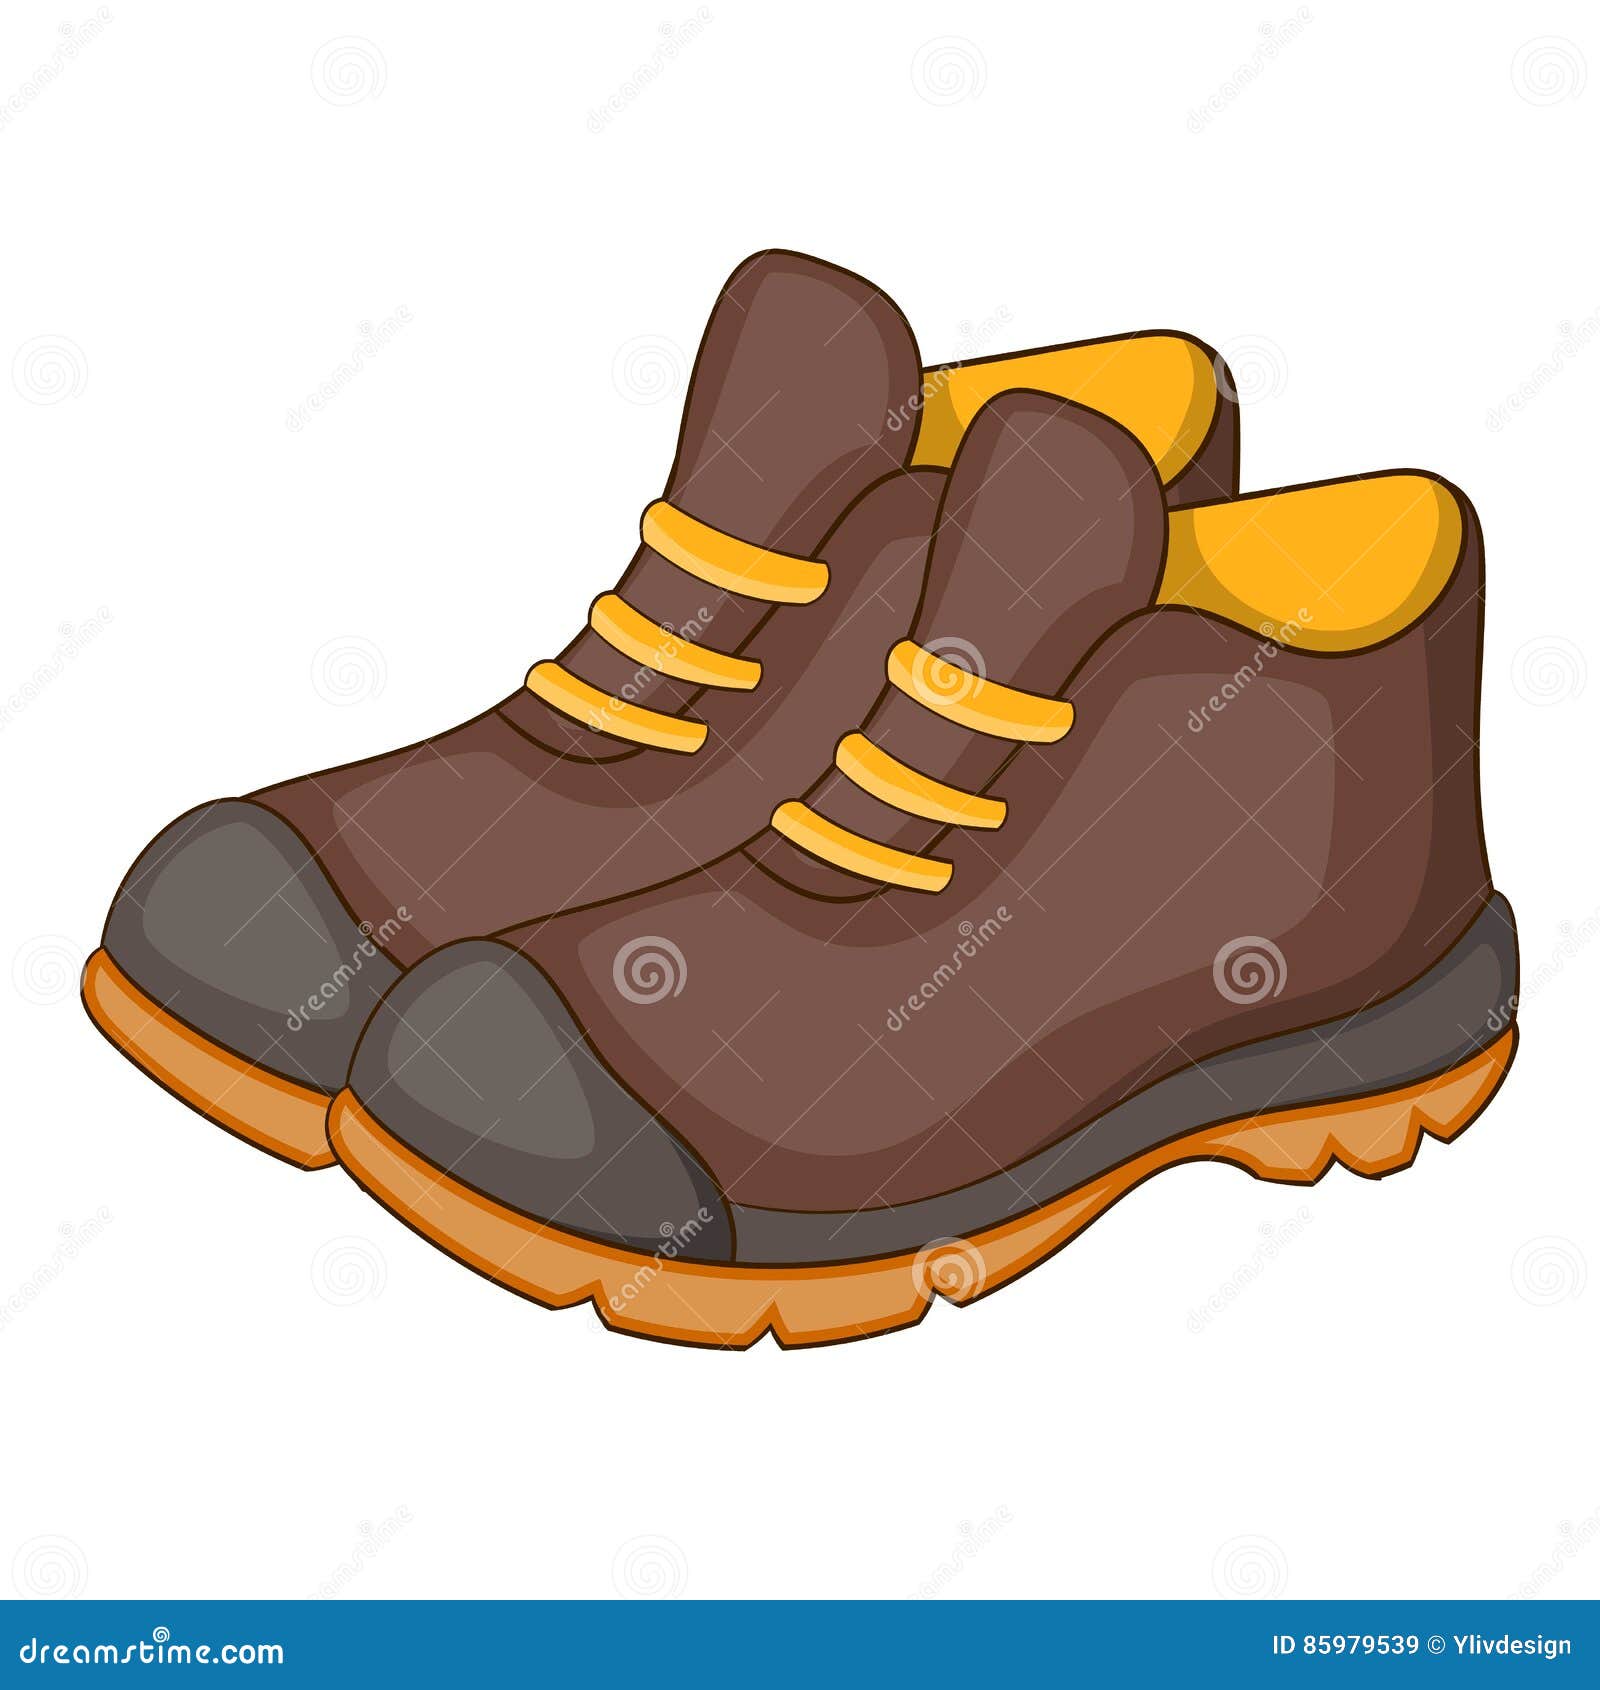 Hiking Boots Icon, Cartoon Style Stock Vector - Illustration of bowler ...